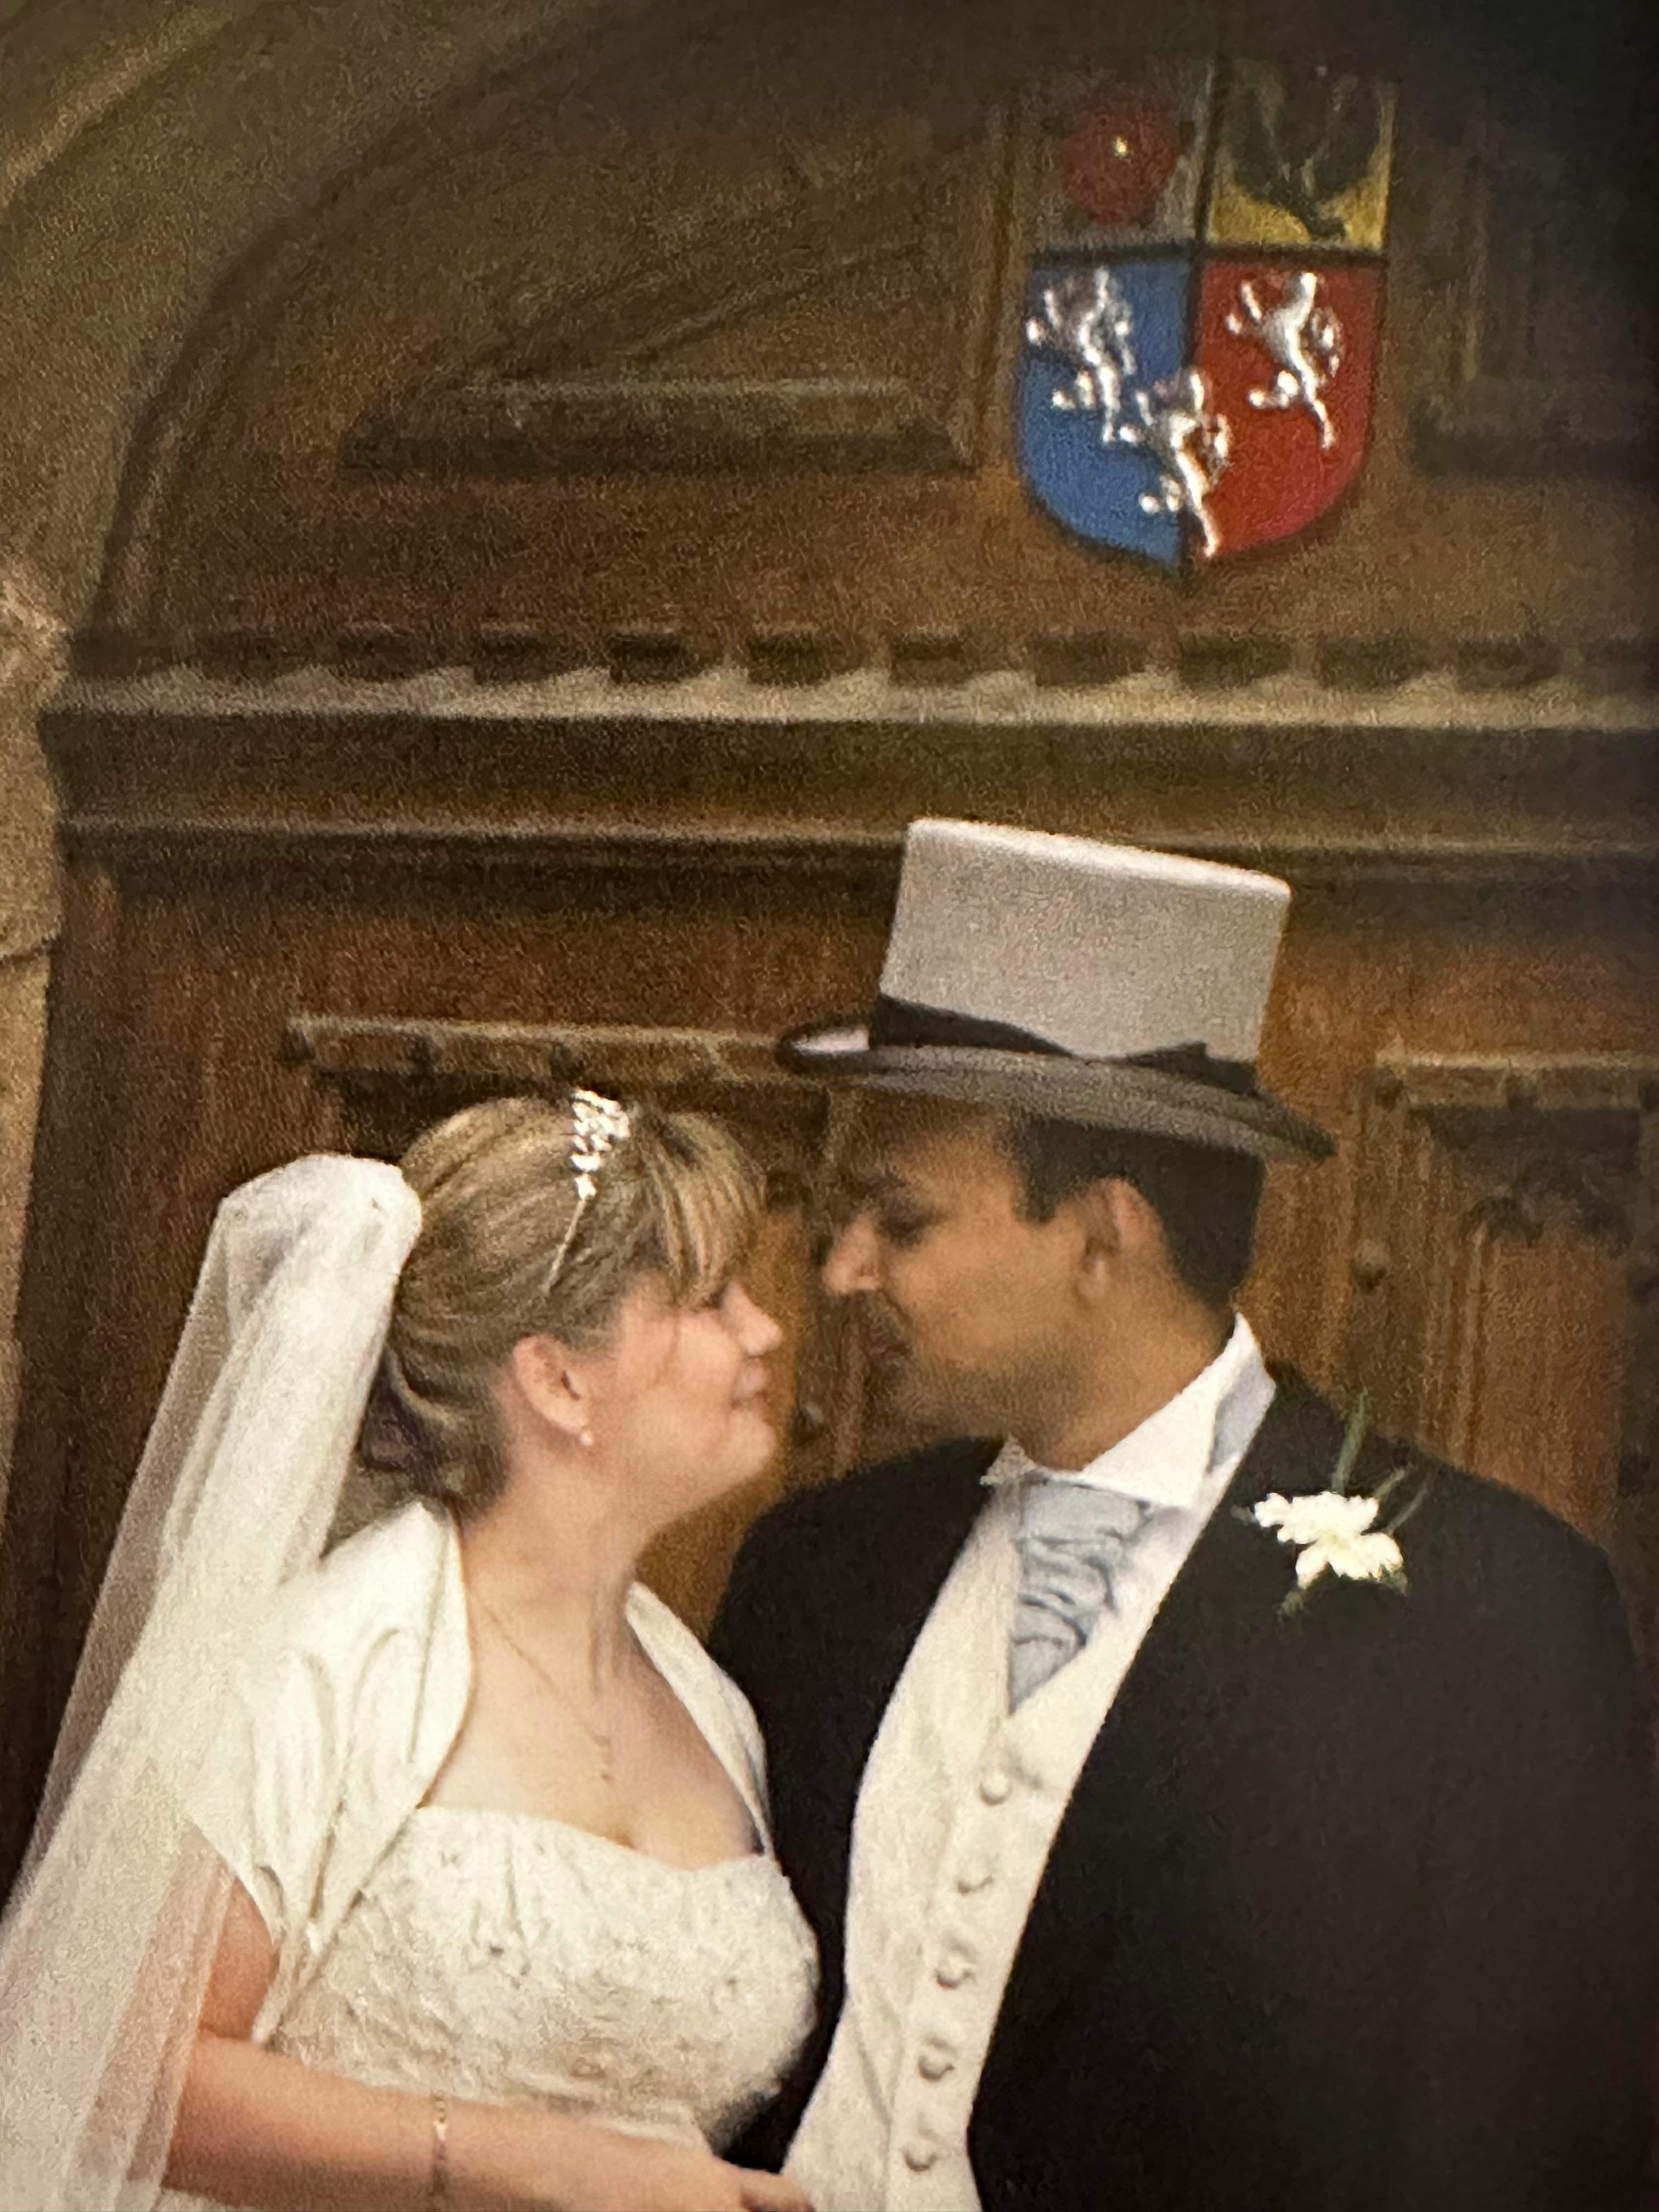 Claire and Aruna on their wedding day in 2008, pictured outside Broadgates Hall.